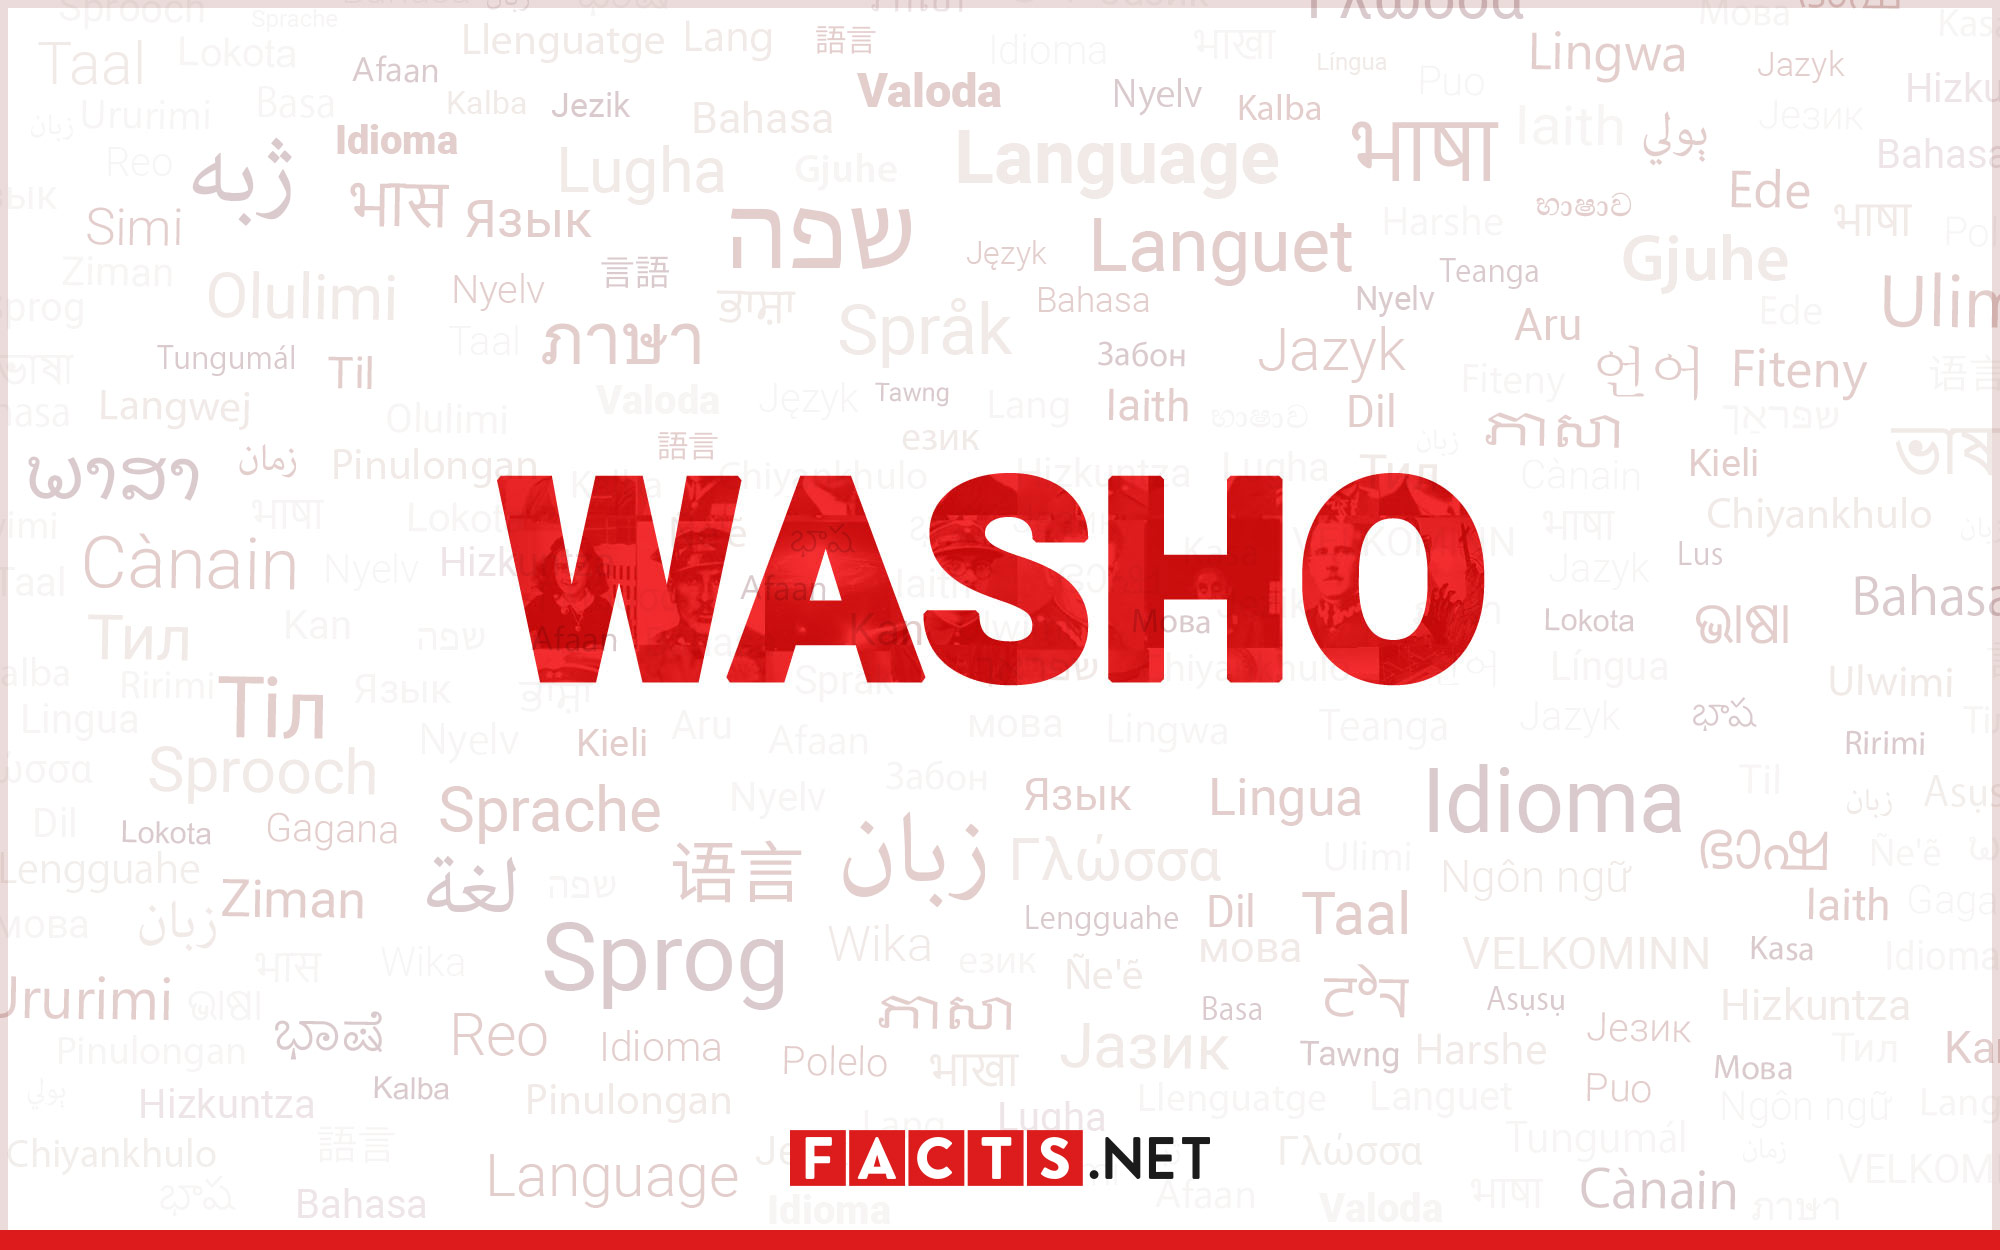 17-captivating-facts-about-washo